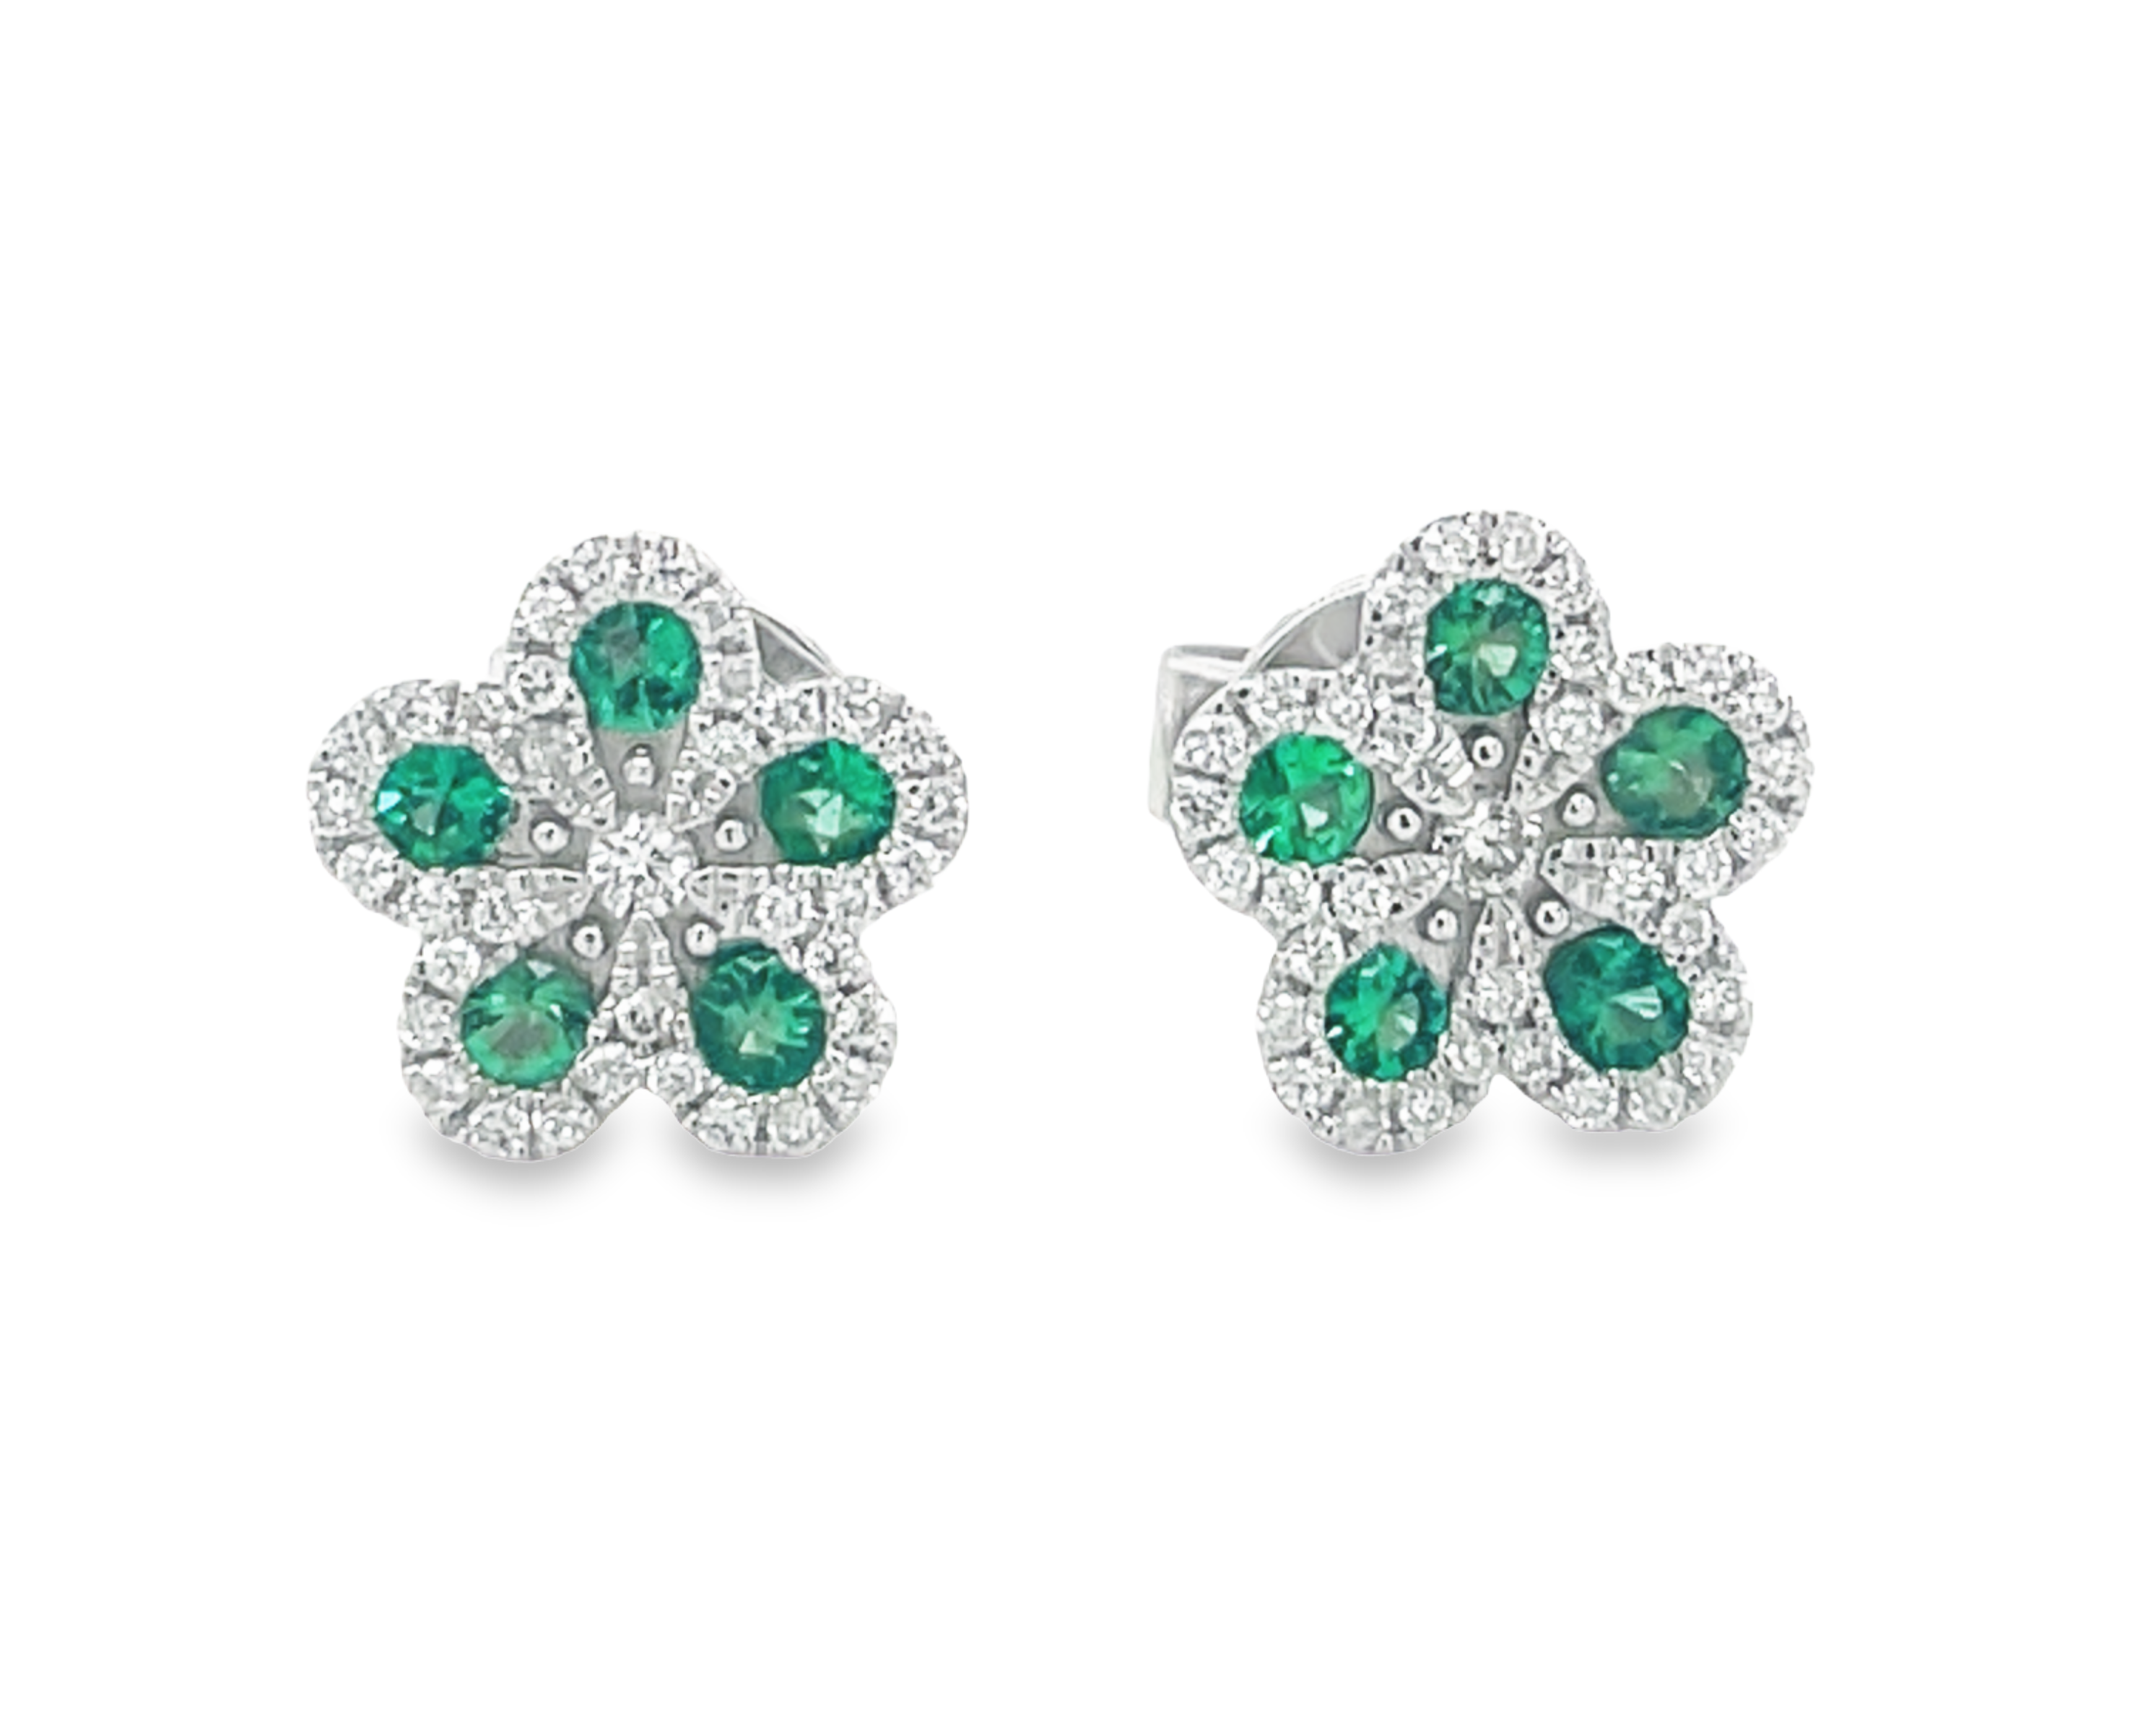 These 18k white gold earrings feature a beautiful flower motif set with round diamonds, 0.15 cts, and round emeralds, 0.20 cts, all in a luxurious 8.00 mm size and F/G color. Rest easy with secure friction backs.